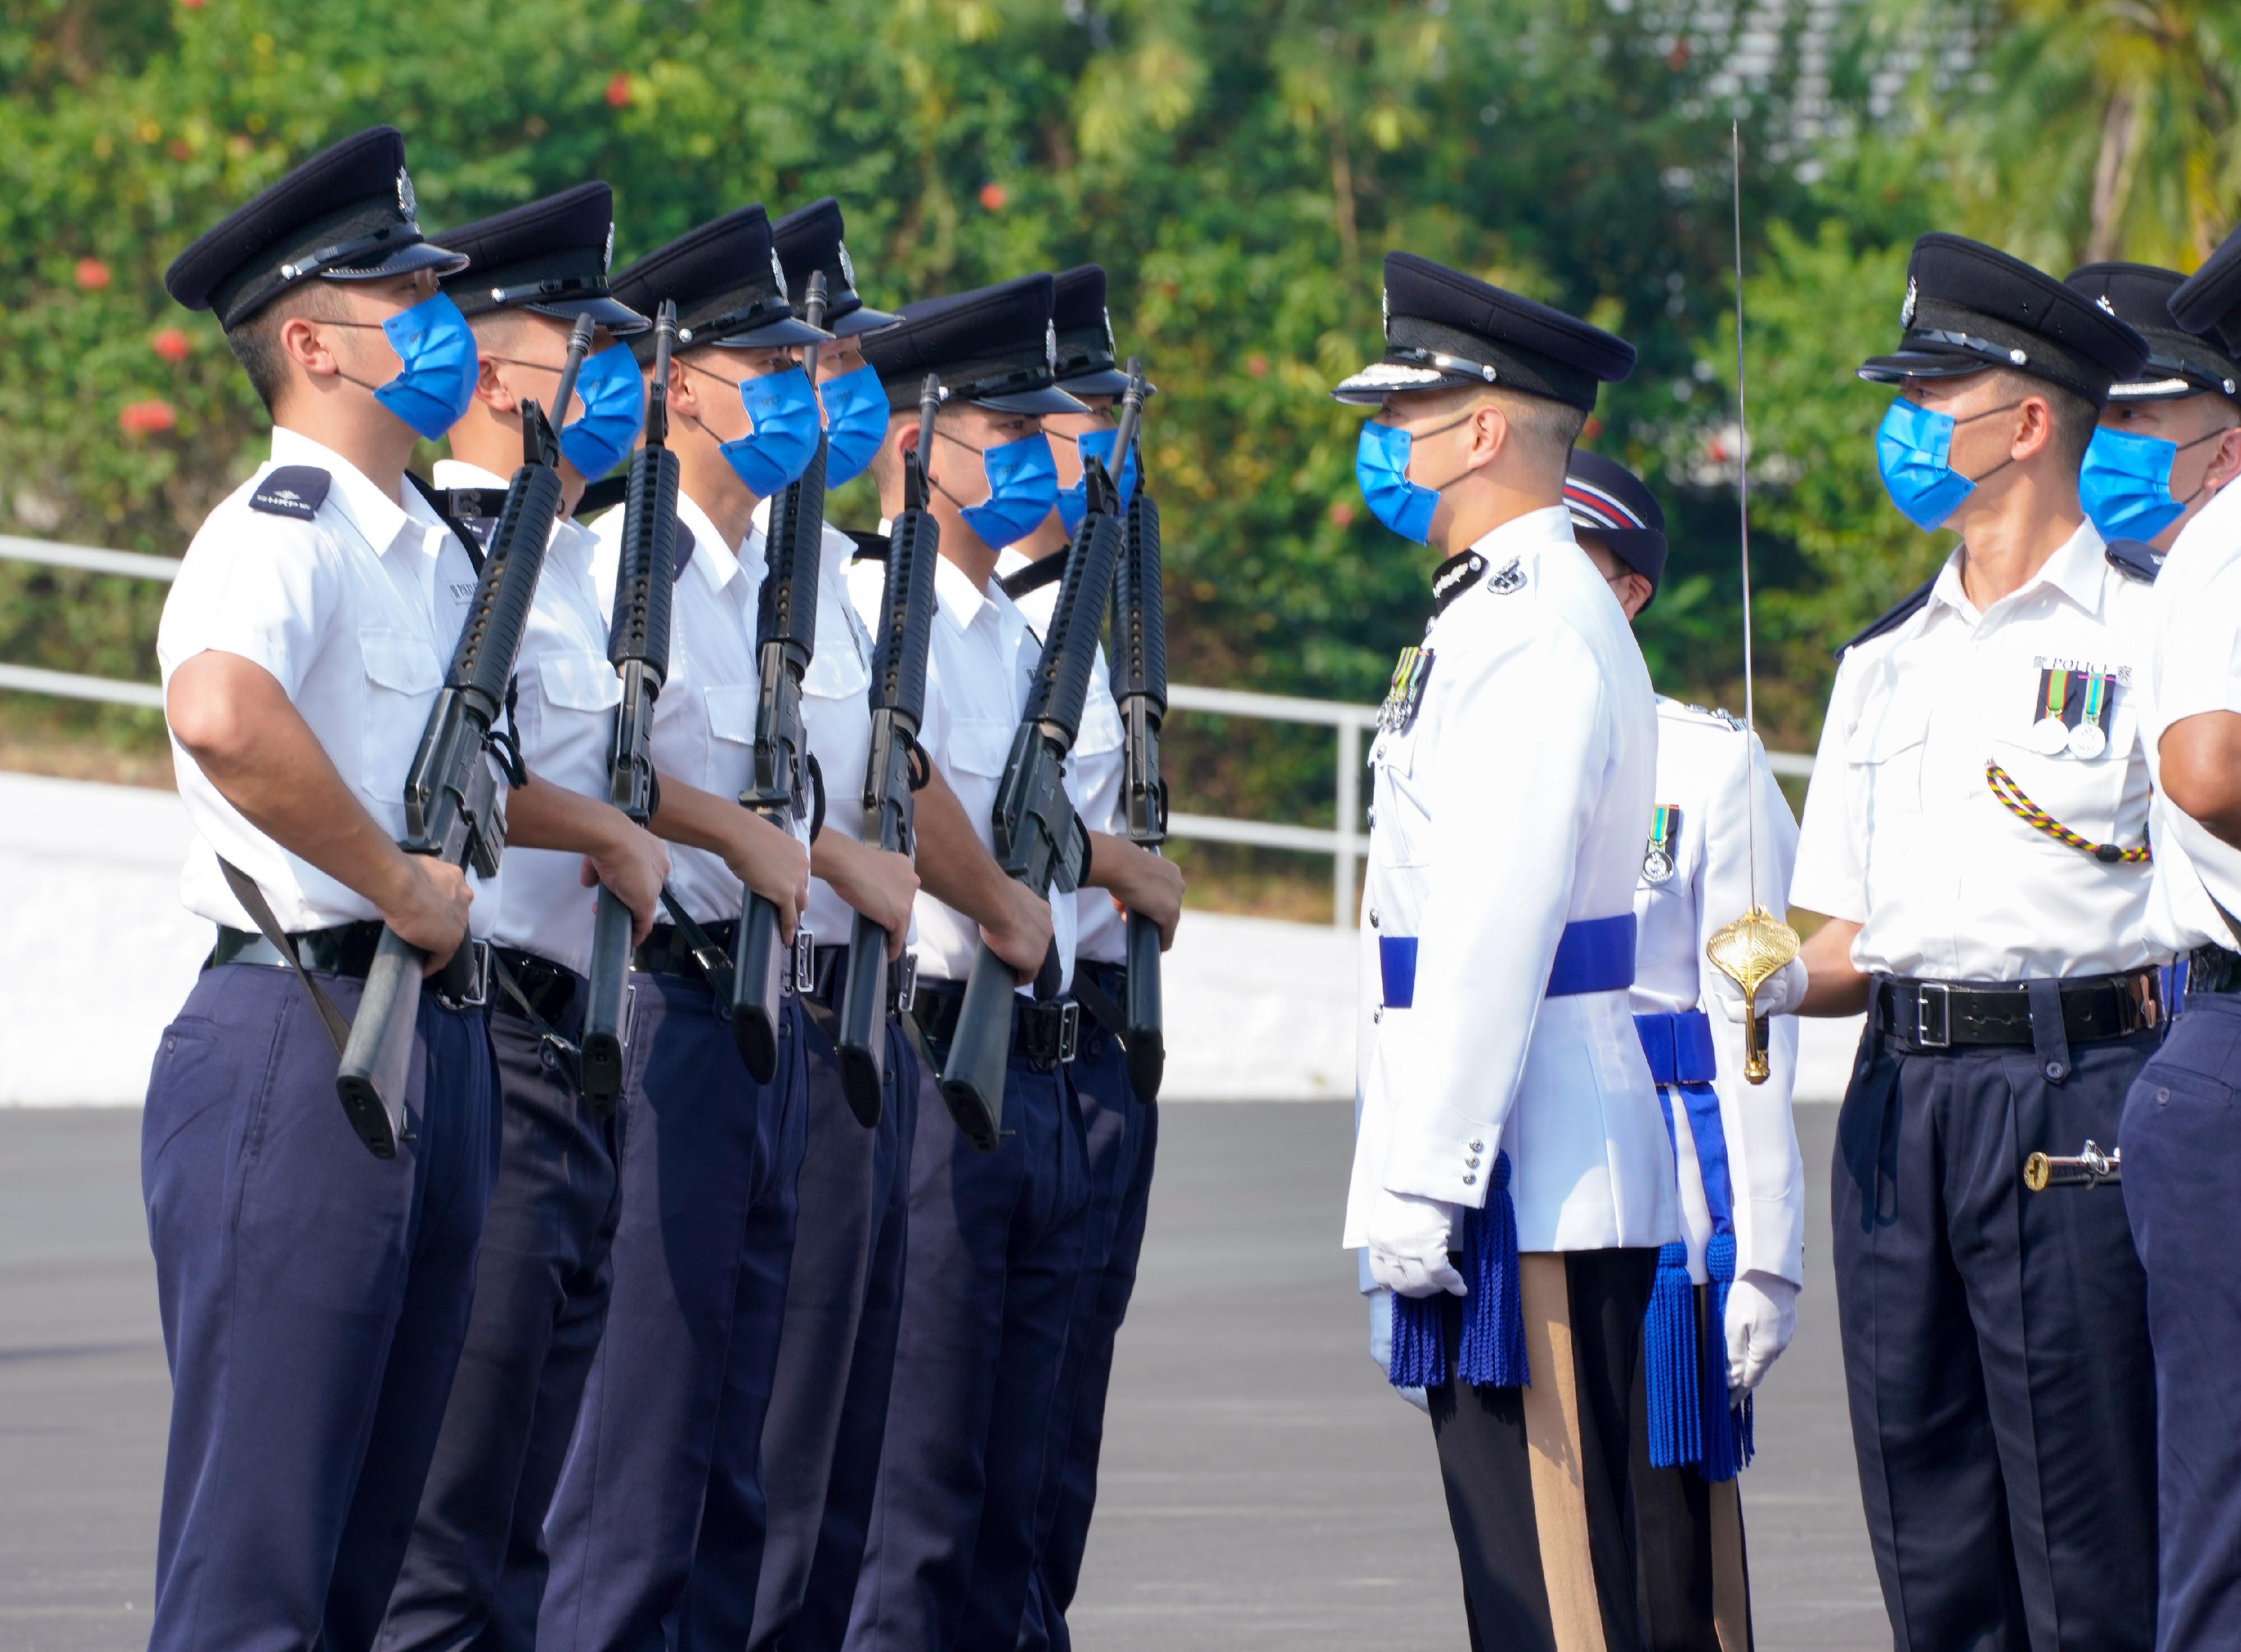 The Deputy Commissioner of Police (Management), Mr Chow Yat-ming, today (September 17) inspects a passing-out parade of 35 probationary inspectors and 58 recruit police constables at the Hong Kong Police College.